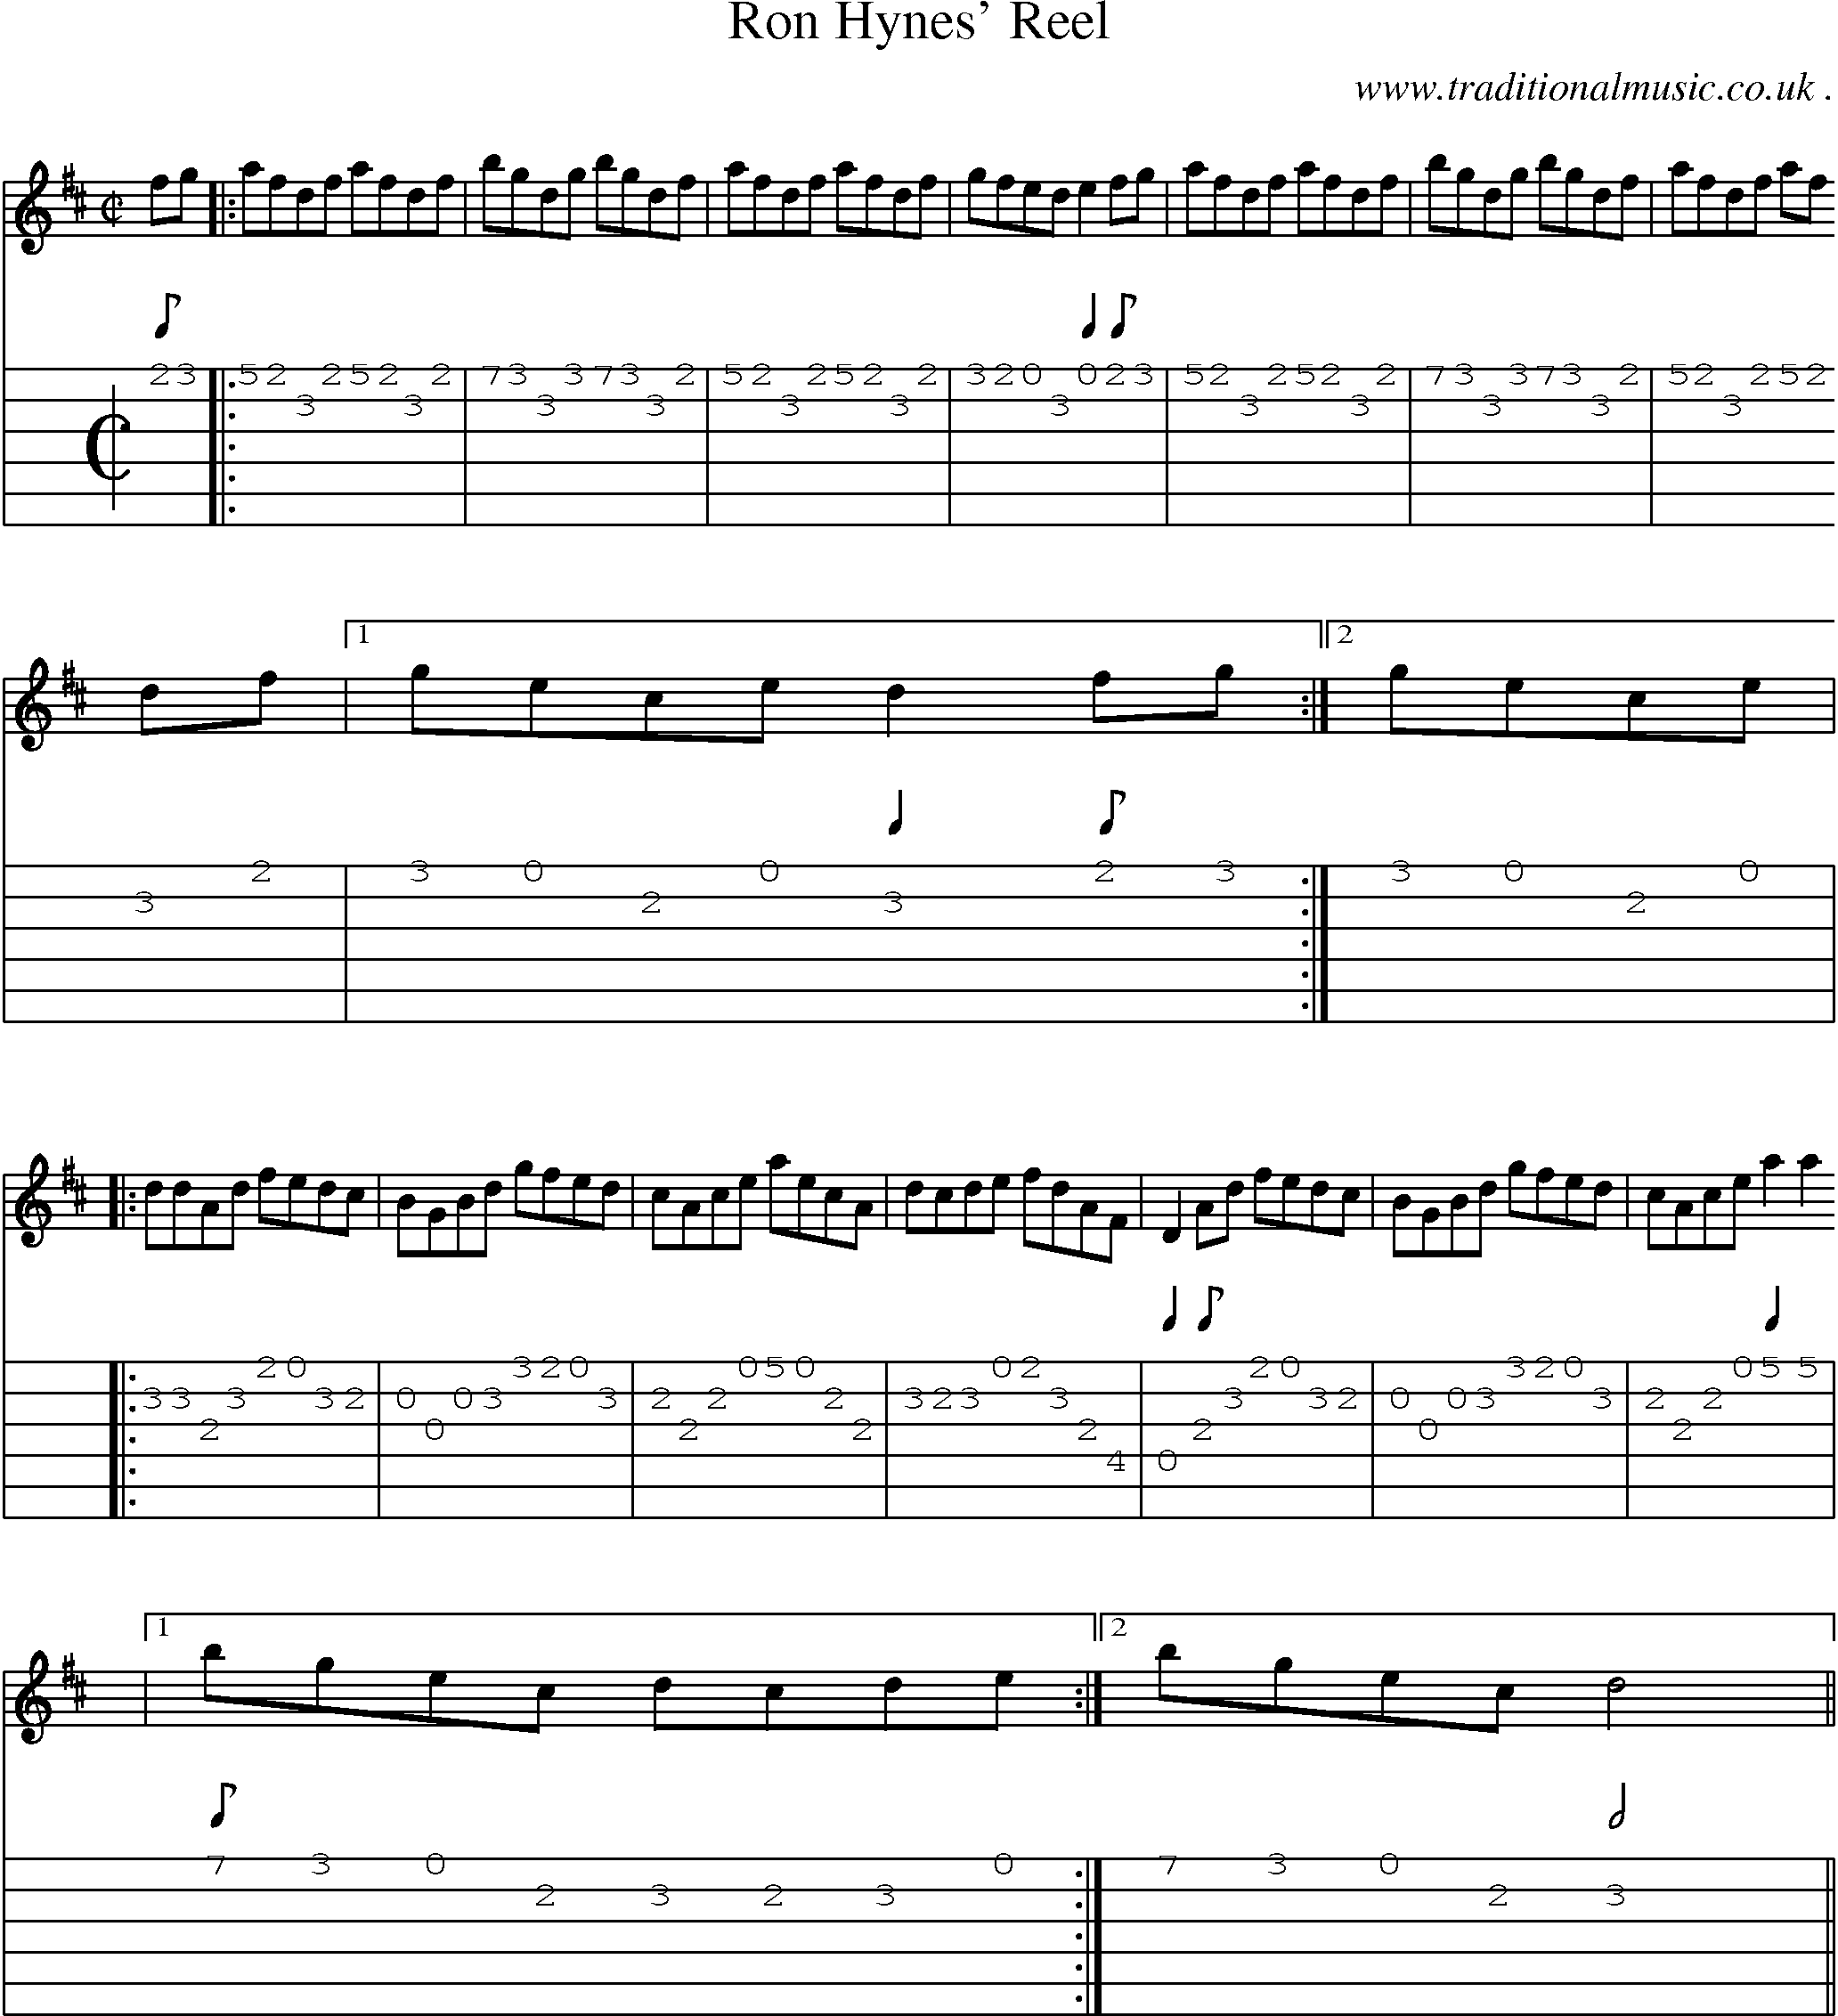 Sheet-Music and Guitar Tabs for Ron Hynes Reel